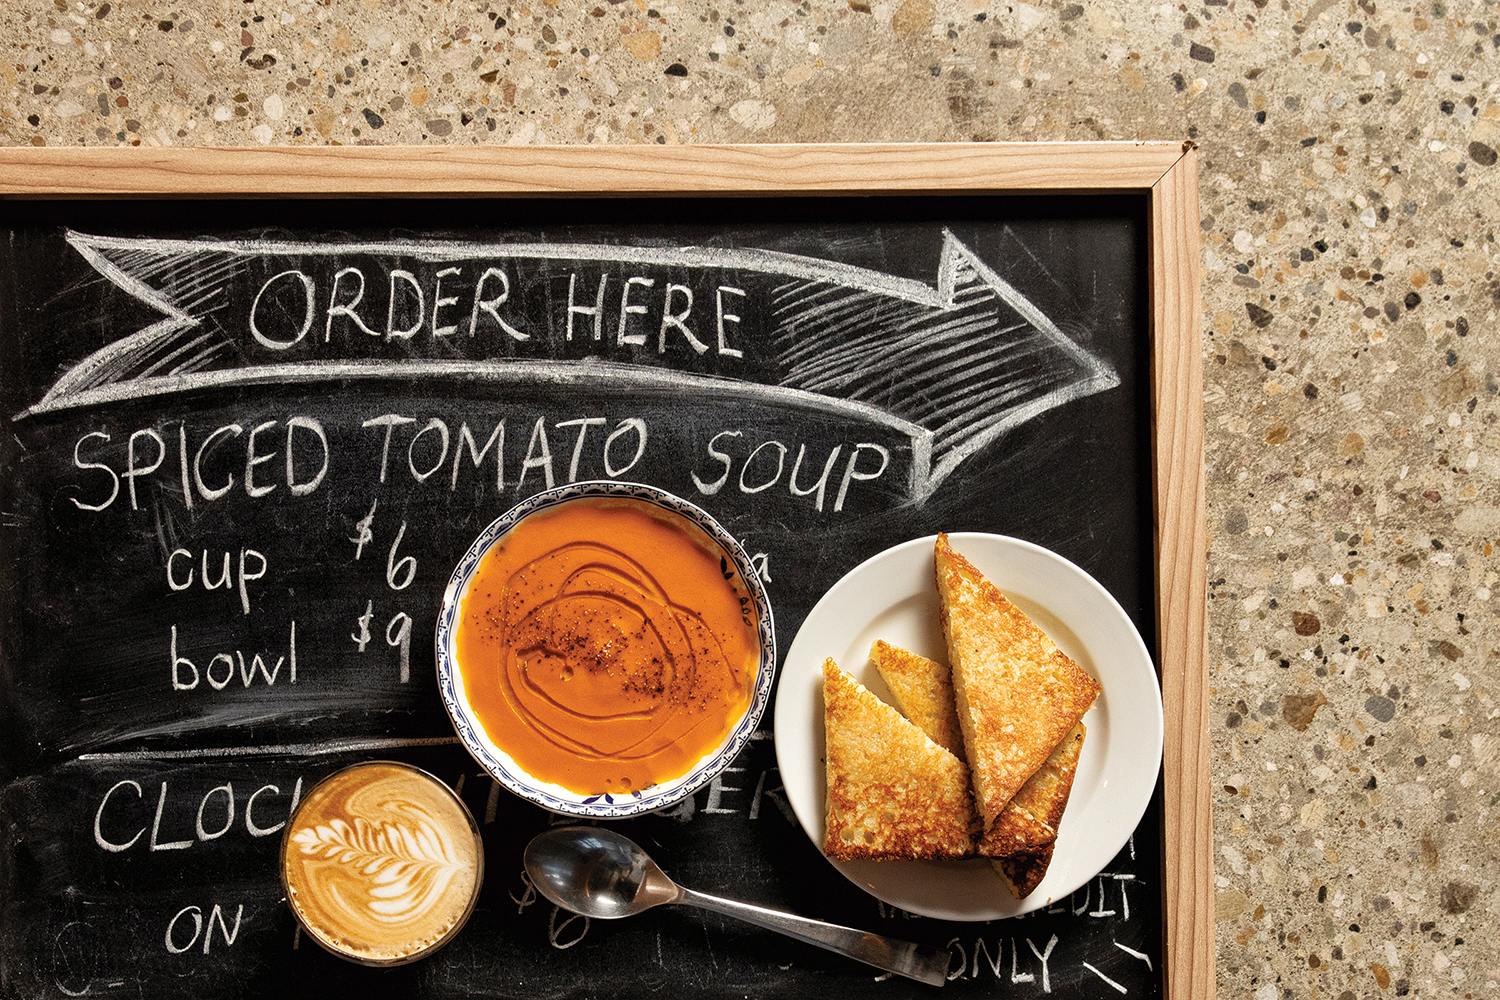 Tomato Soup is an all-time lunch classic at Rosewood Foods